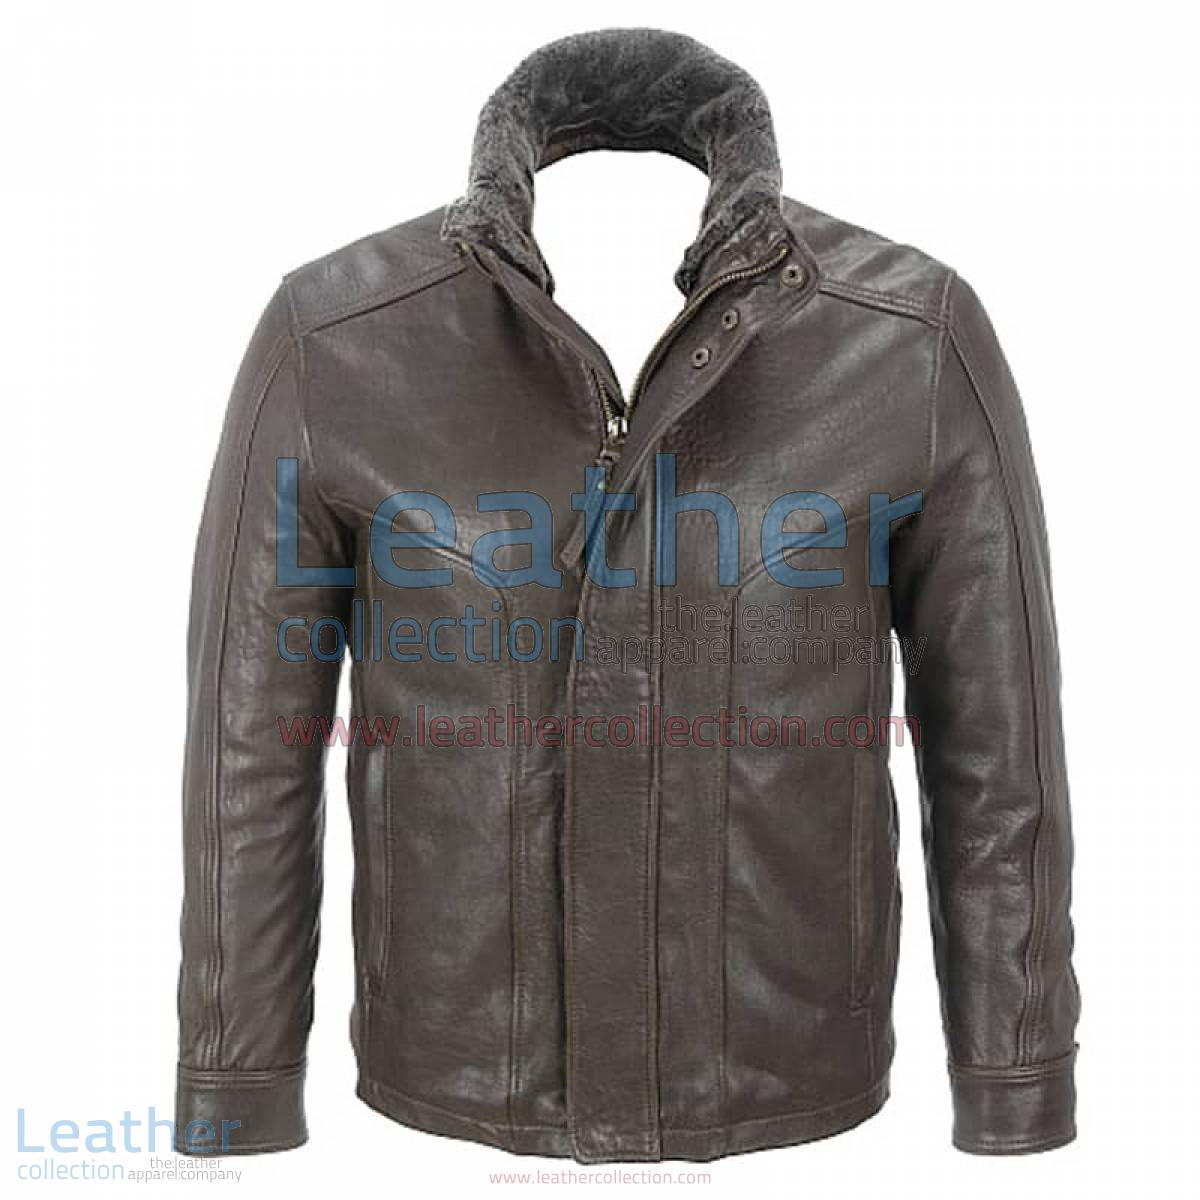 Rugged Leather Jacket with Removable Shearling Collar | shearling collar jacket